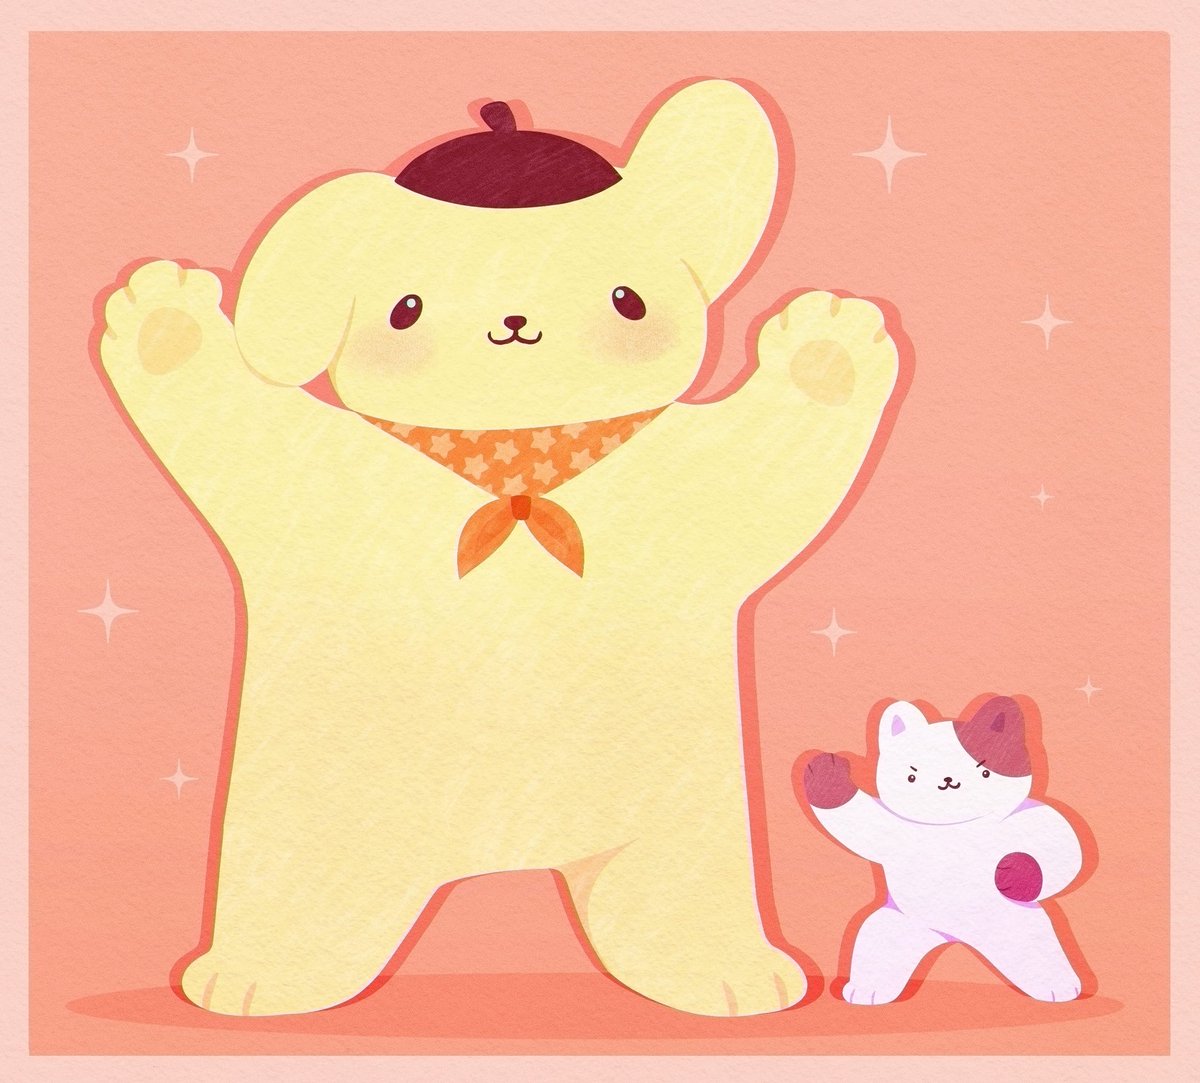 Mr. Pompompurin (+muffin) !! 🐶🍮🐹

Everyone should totally vote him for best boy in the sanrio character rankings 💛

#pompompurin #sanrio #SanrioCharacterRanking